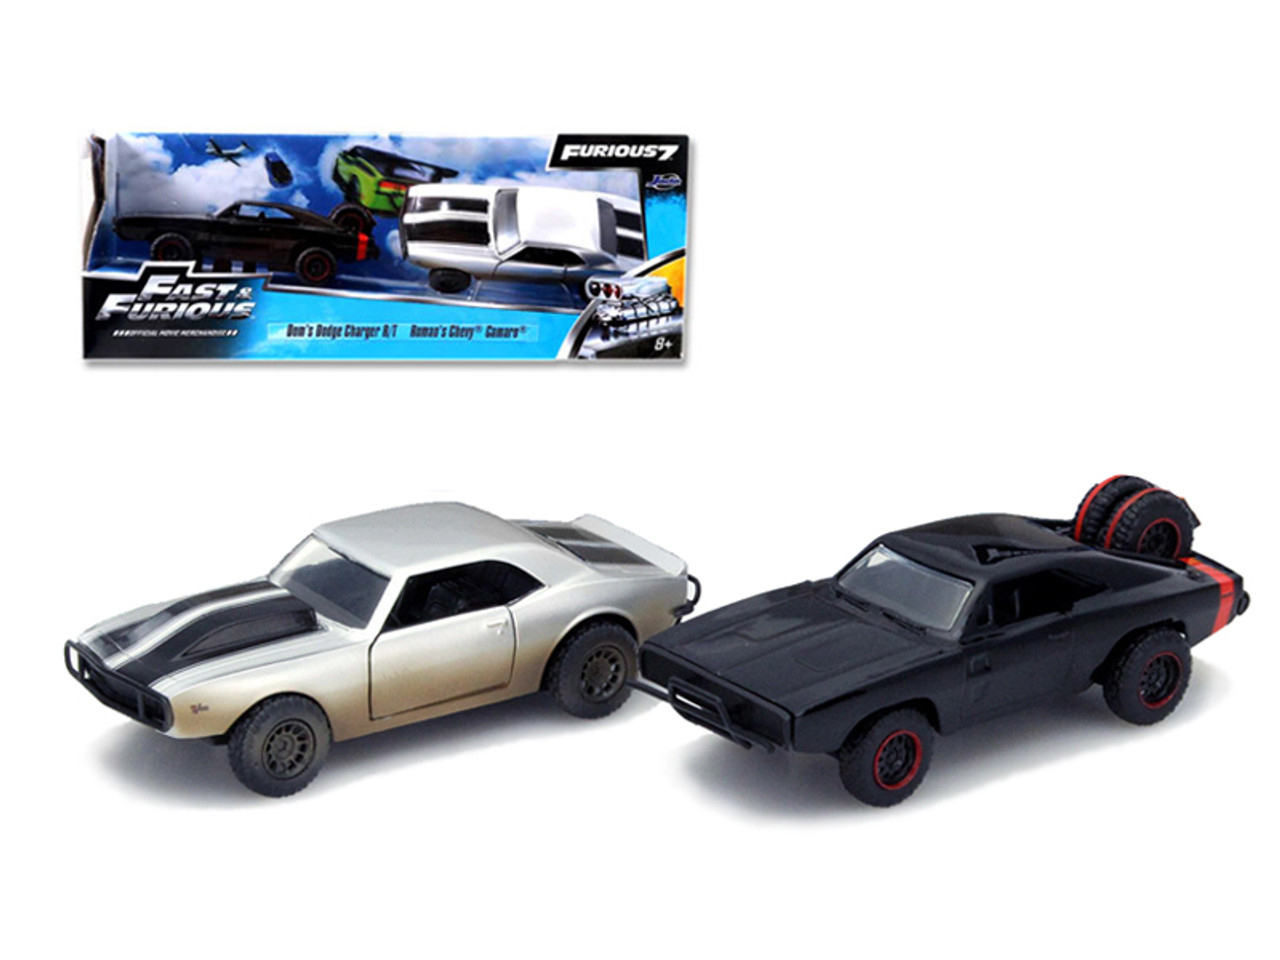 Dom's 1970 Dodge Charger R/T Off Road and Roman's Chevrolet Camaro Z/28 (Dirty Version) "Fast & Furious 7" Movie Set of 2 Cars 1/32 Diecast Model Cars by Jada